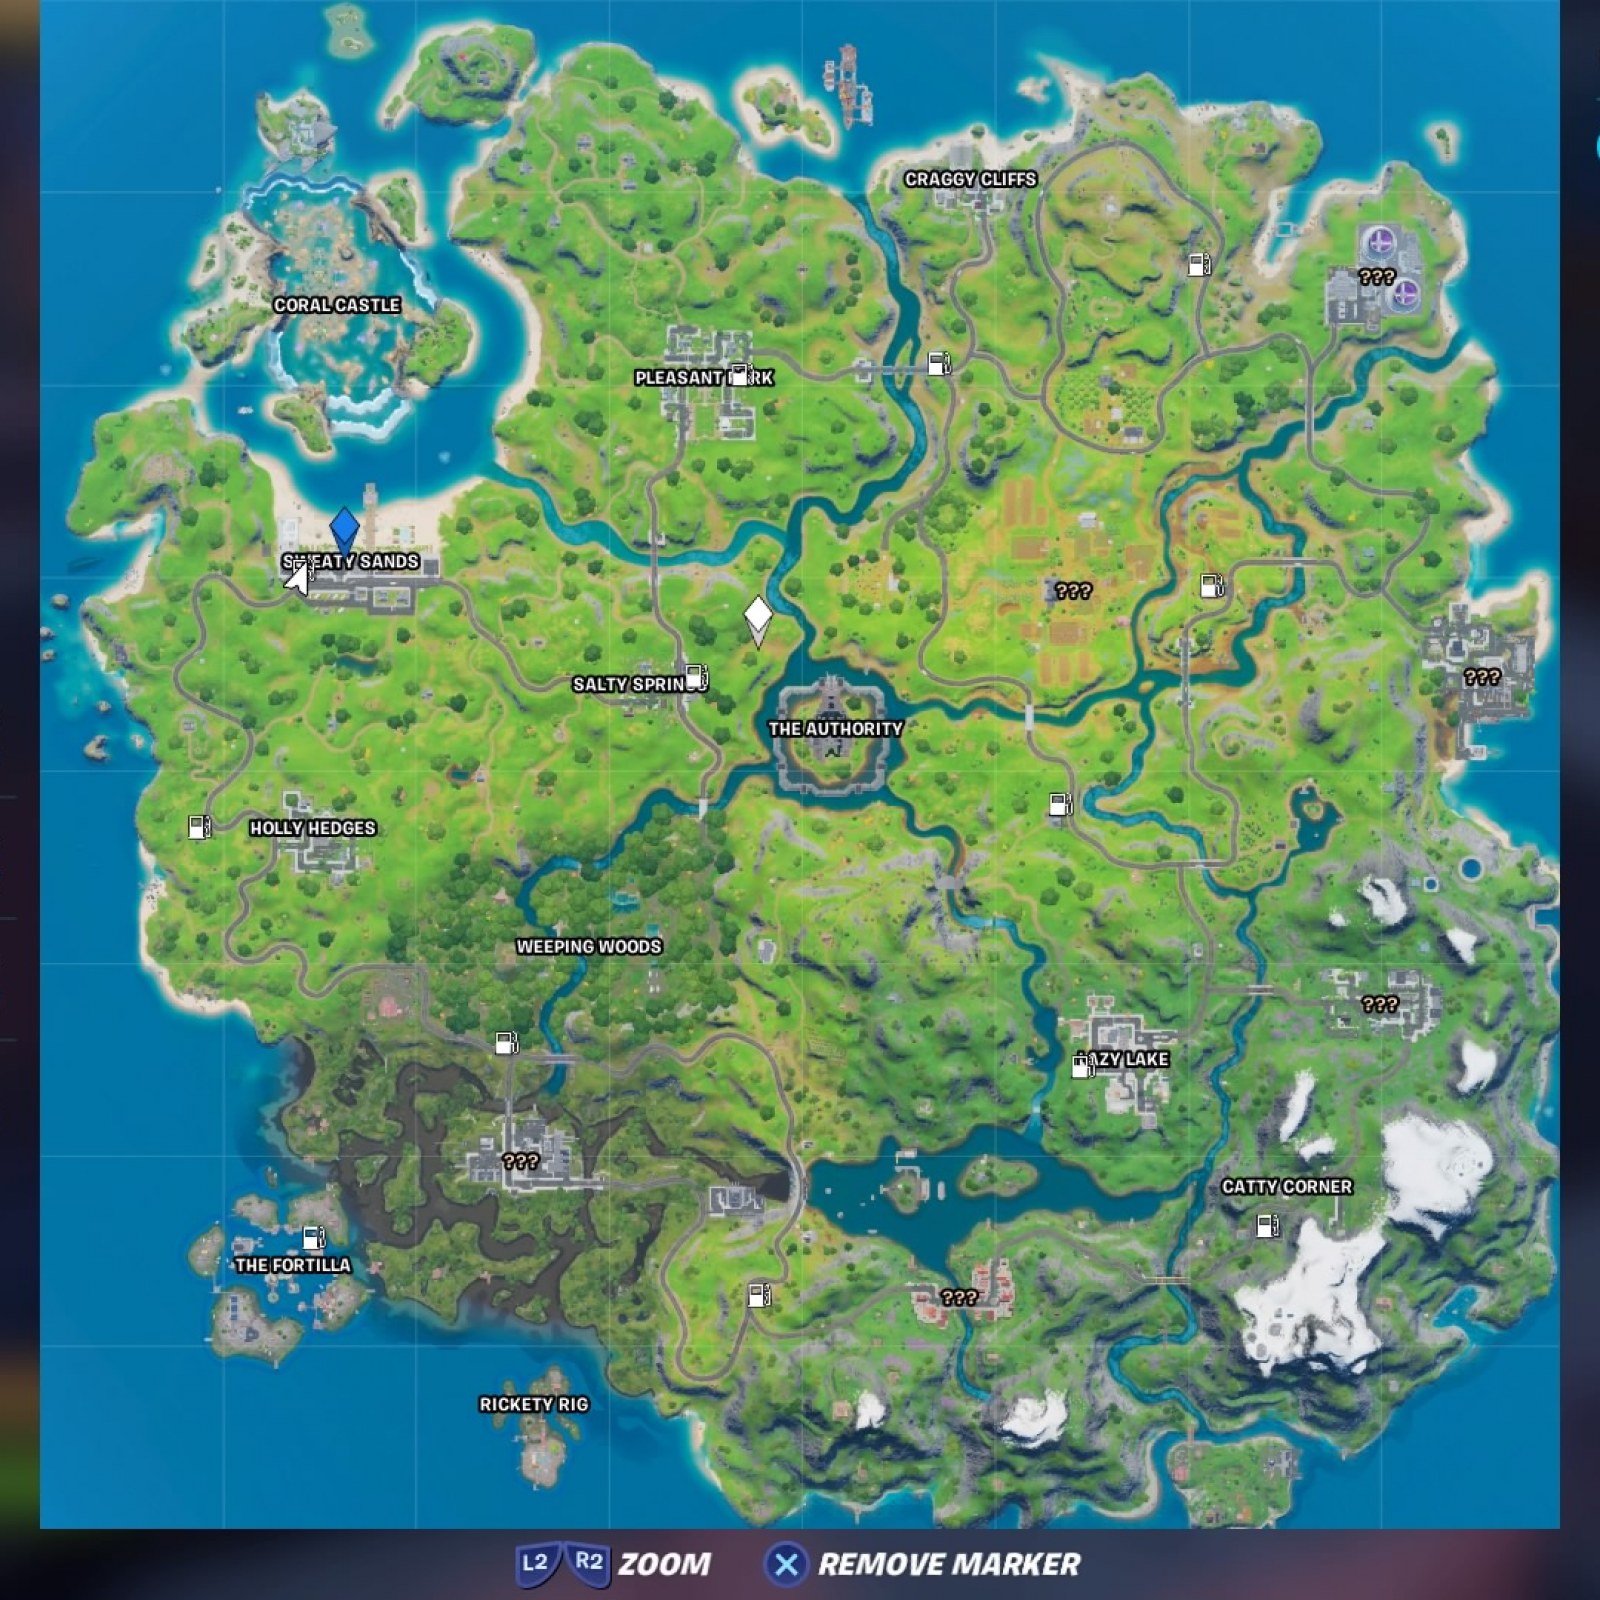 Gas Stations Fortnite Map Fortnite Cars Guide Locations How To Gas Up Where To Find Gas Cans